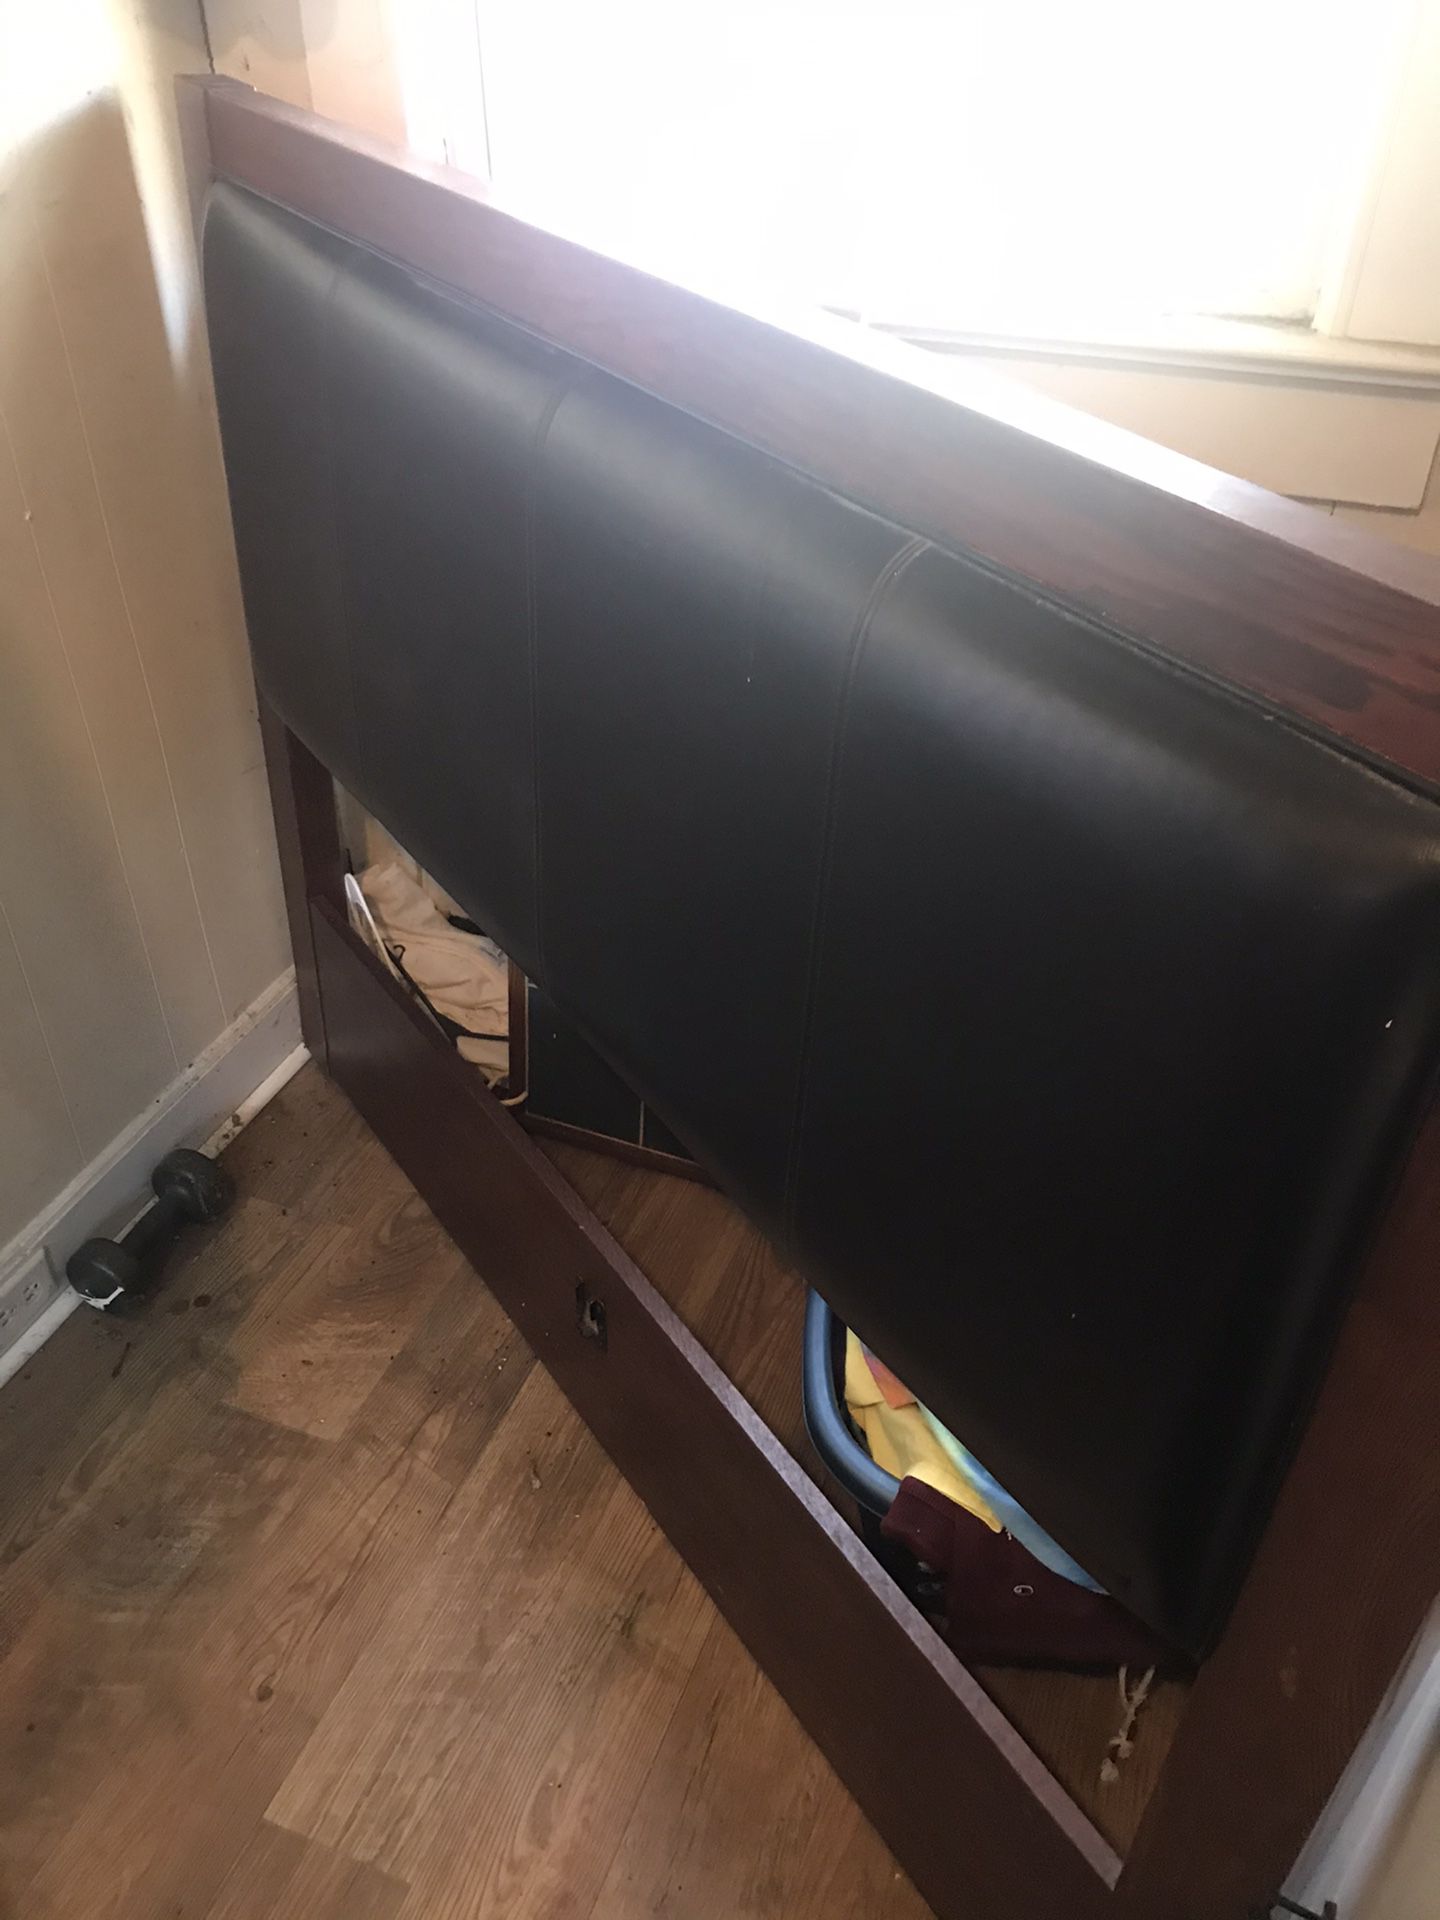 Leather and wood queen size headboard